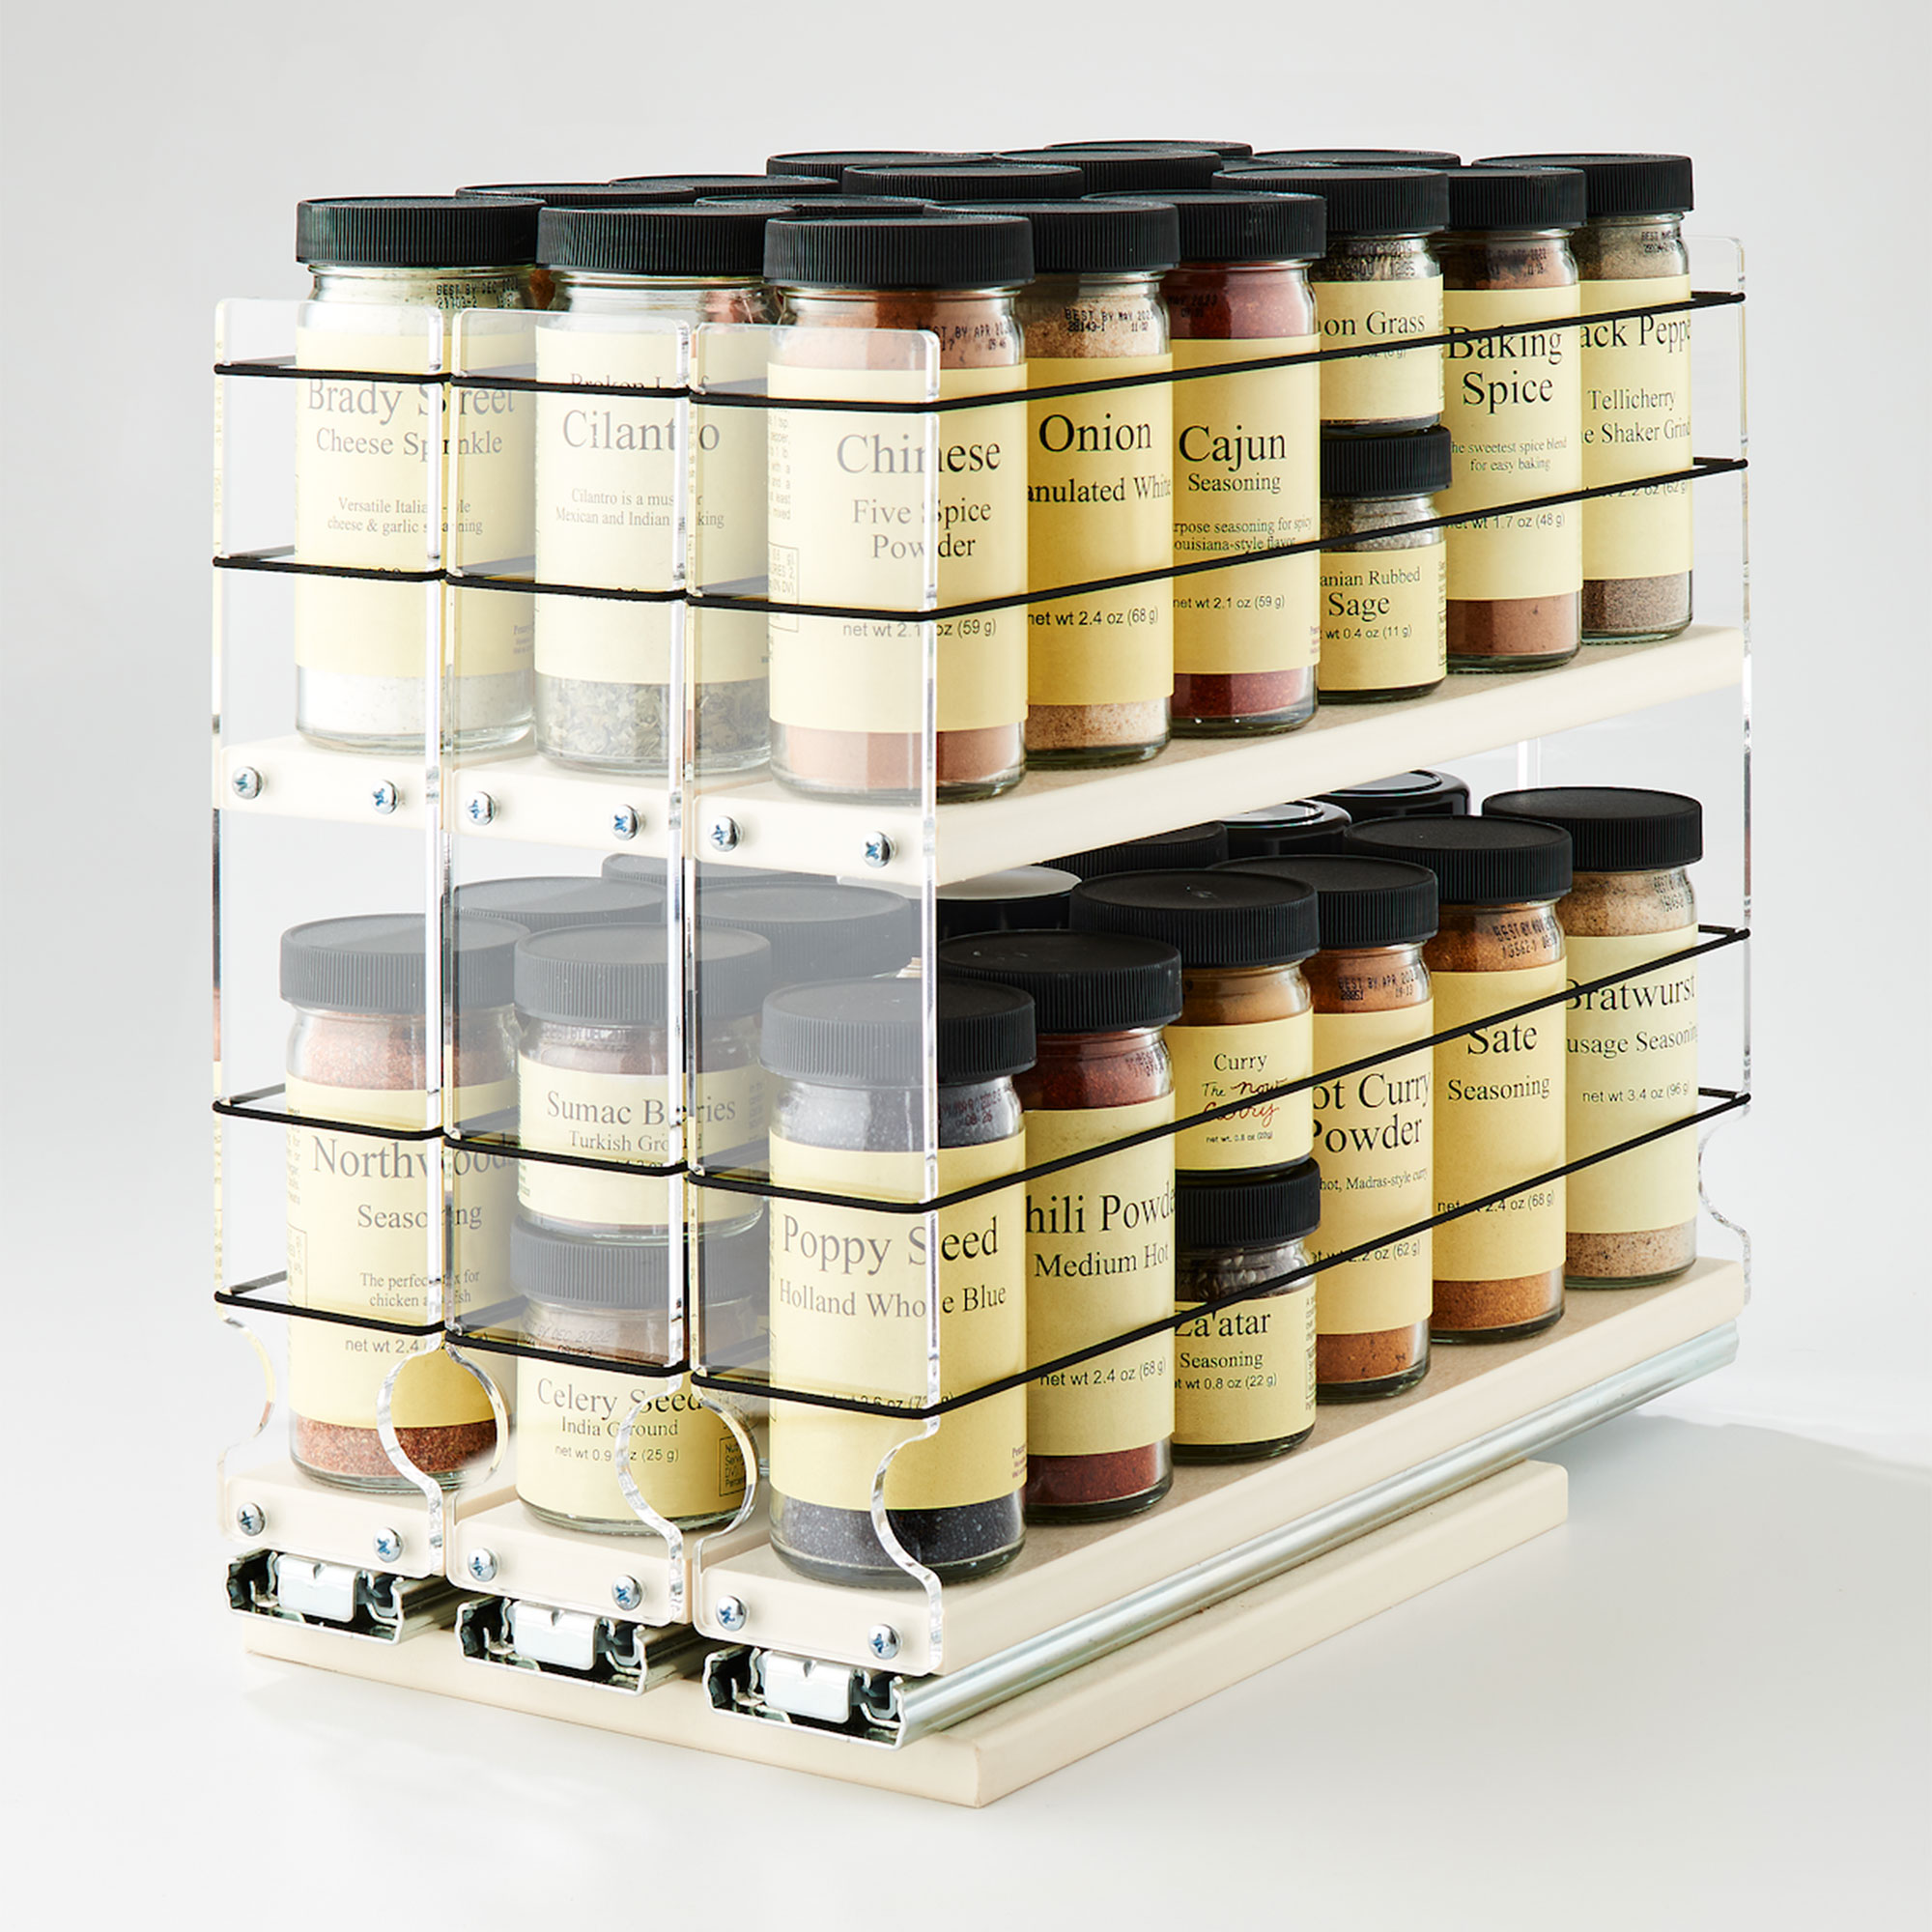 Vertical Spice 2x2x11 DCP Spice Rack Drawer 2 Tiers, Cream, 10 Jar Capacity with Flex-Sides, Sliding, Pullout, Partially Assembled